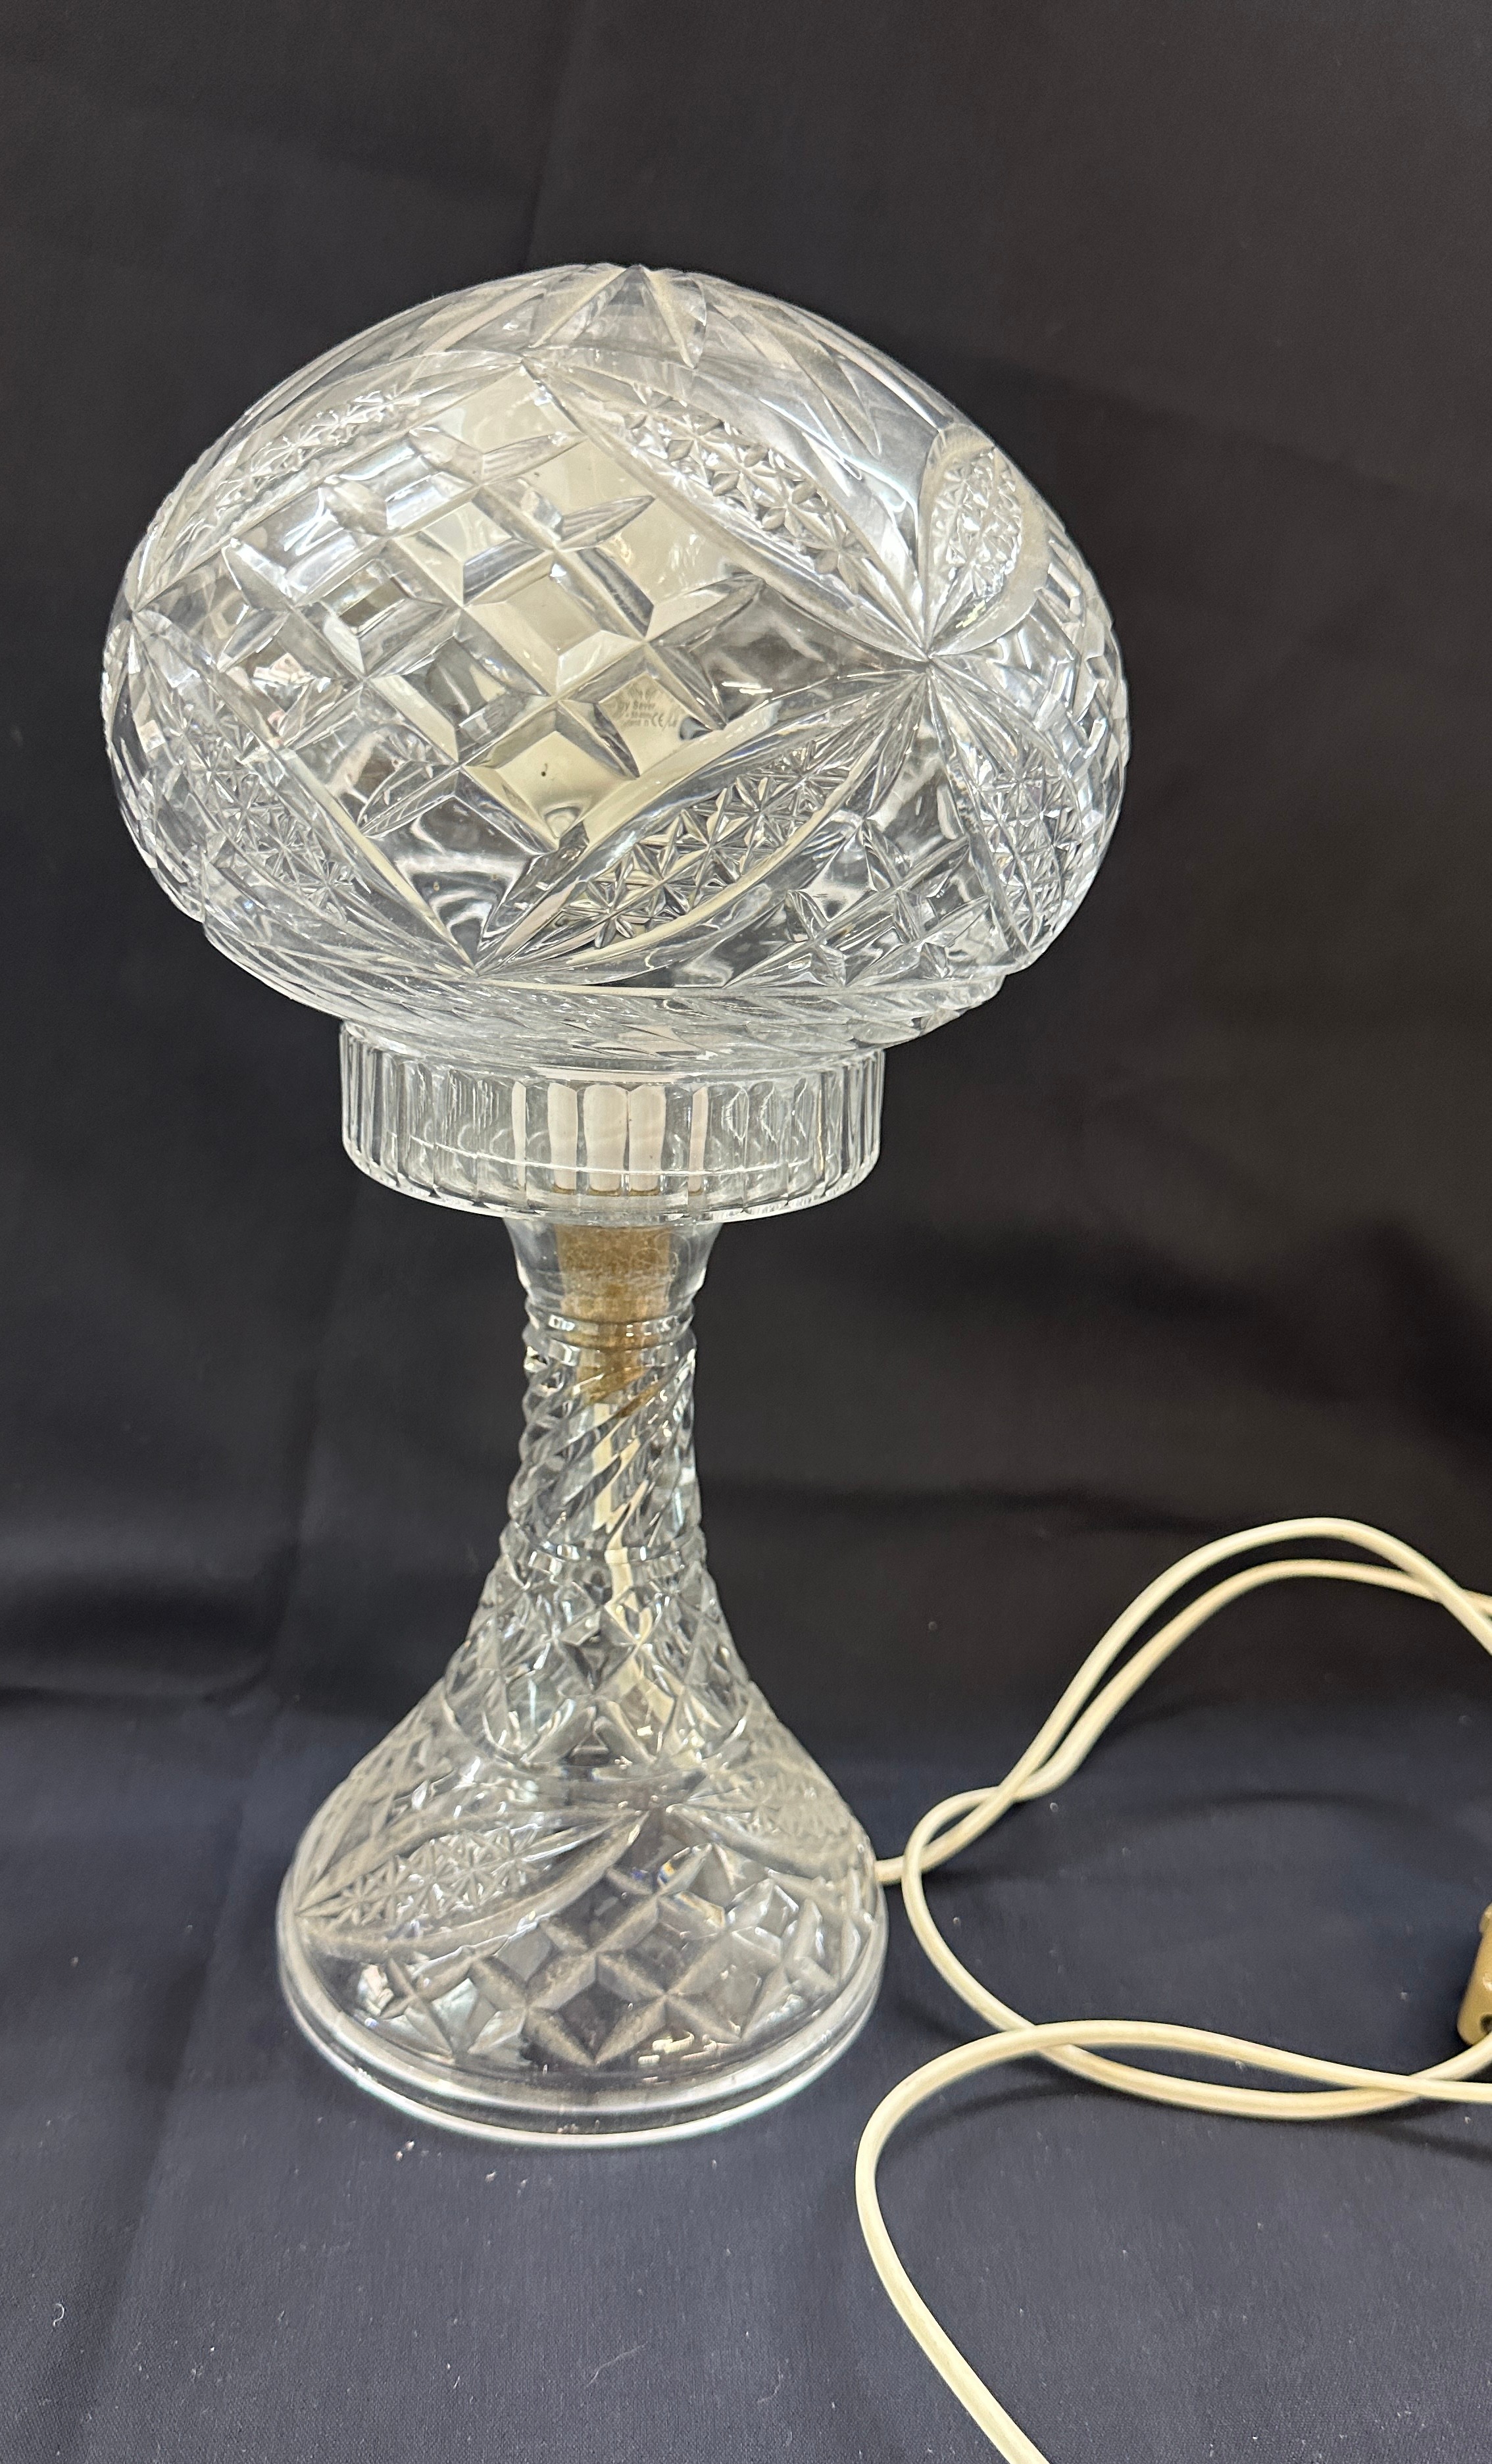 Glass base and shade vintage lamp overall height 14 inches - Image 2 of 4